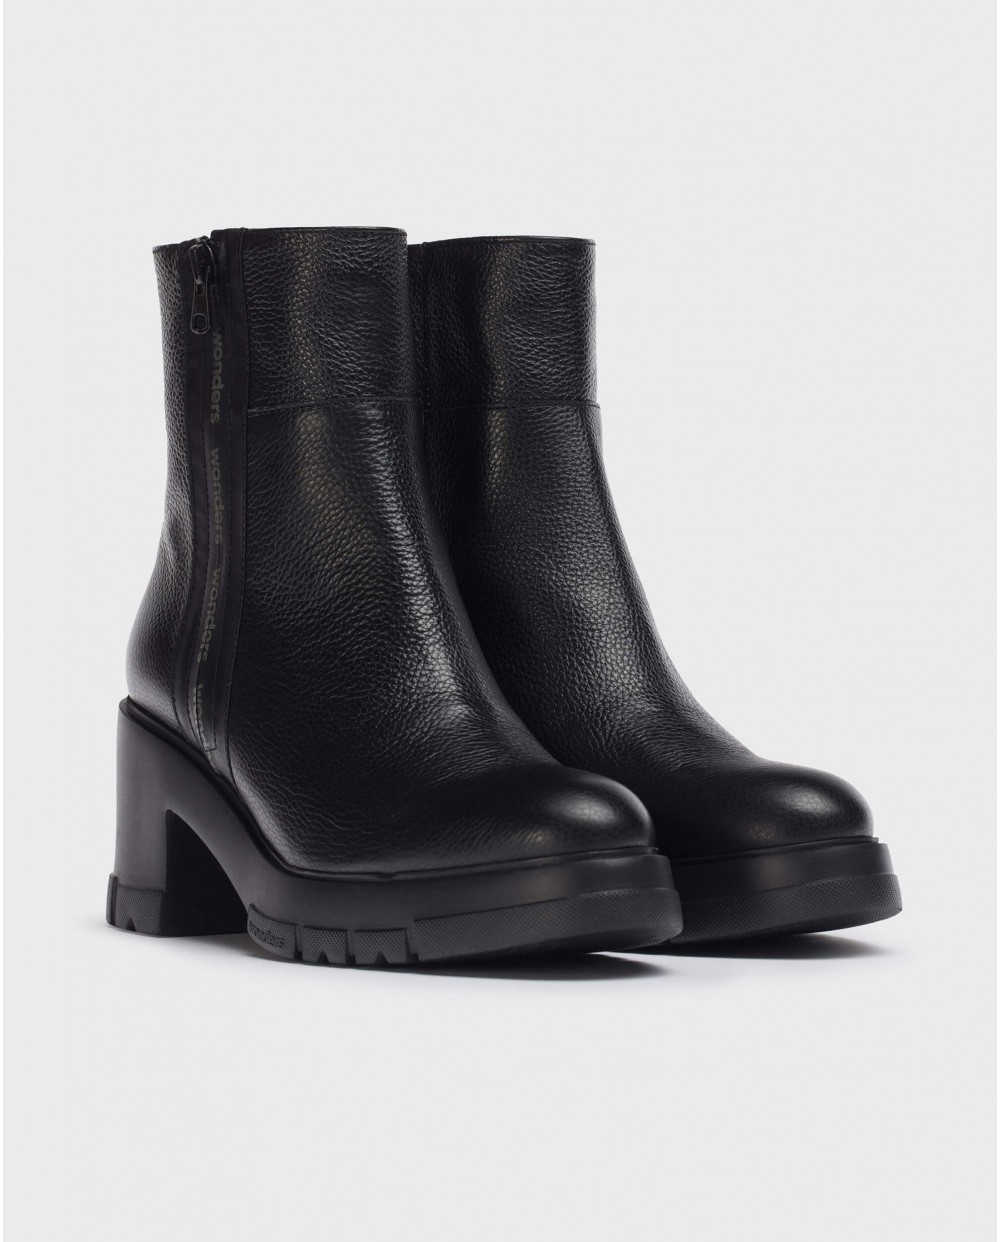 Wonders-Outlet-Black Camila Ankle Boot